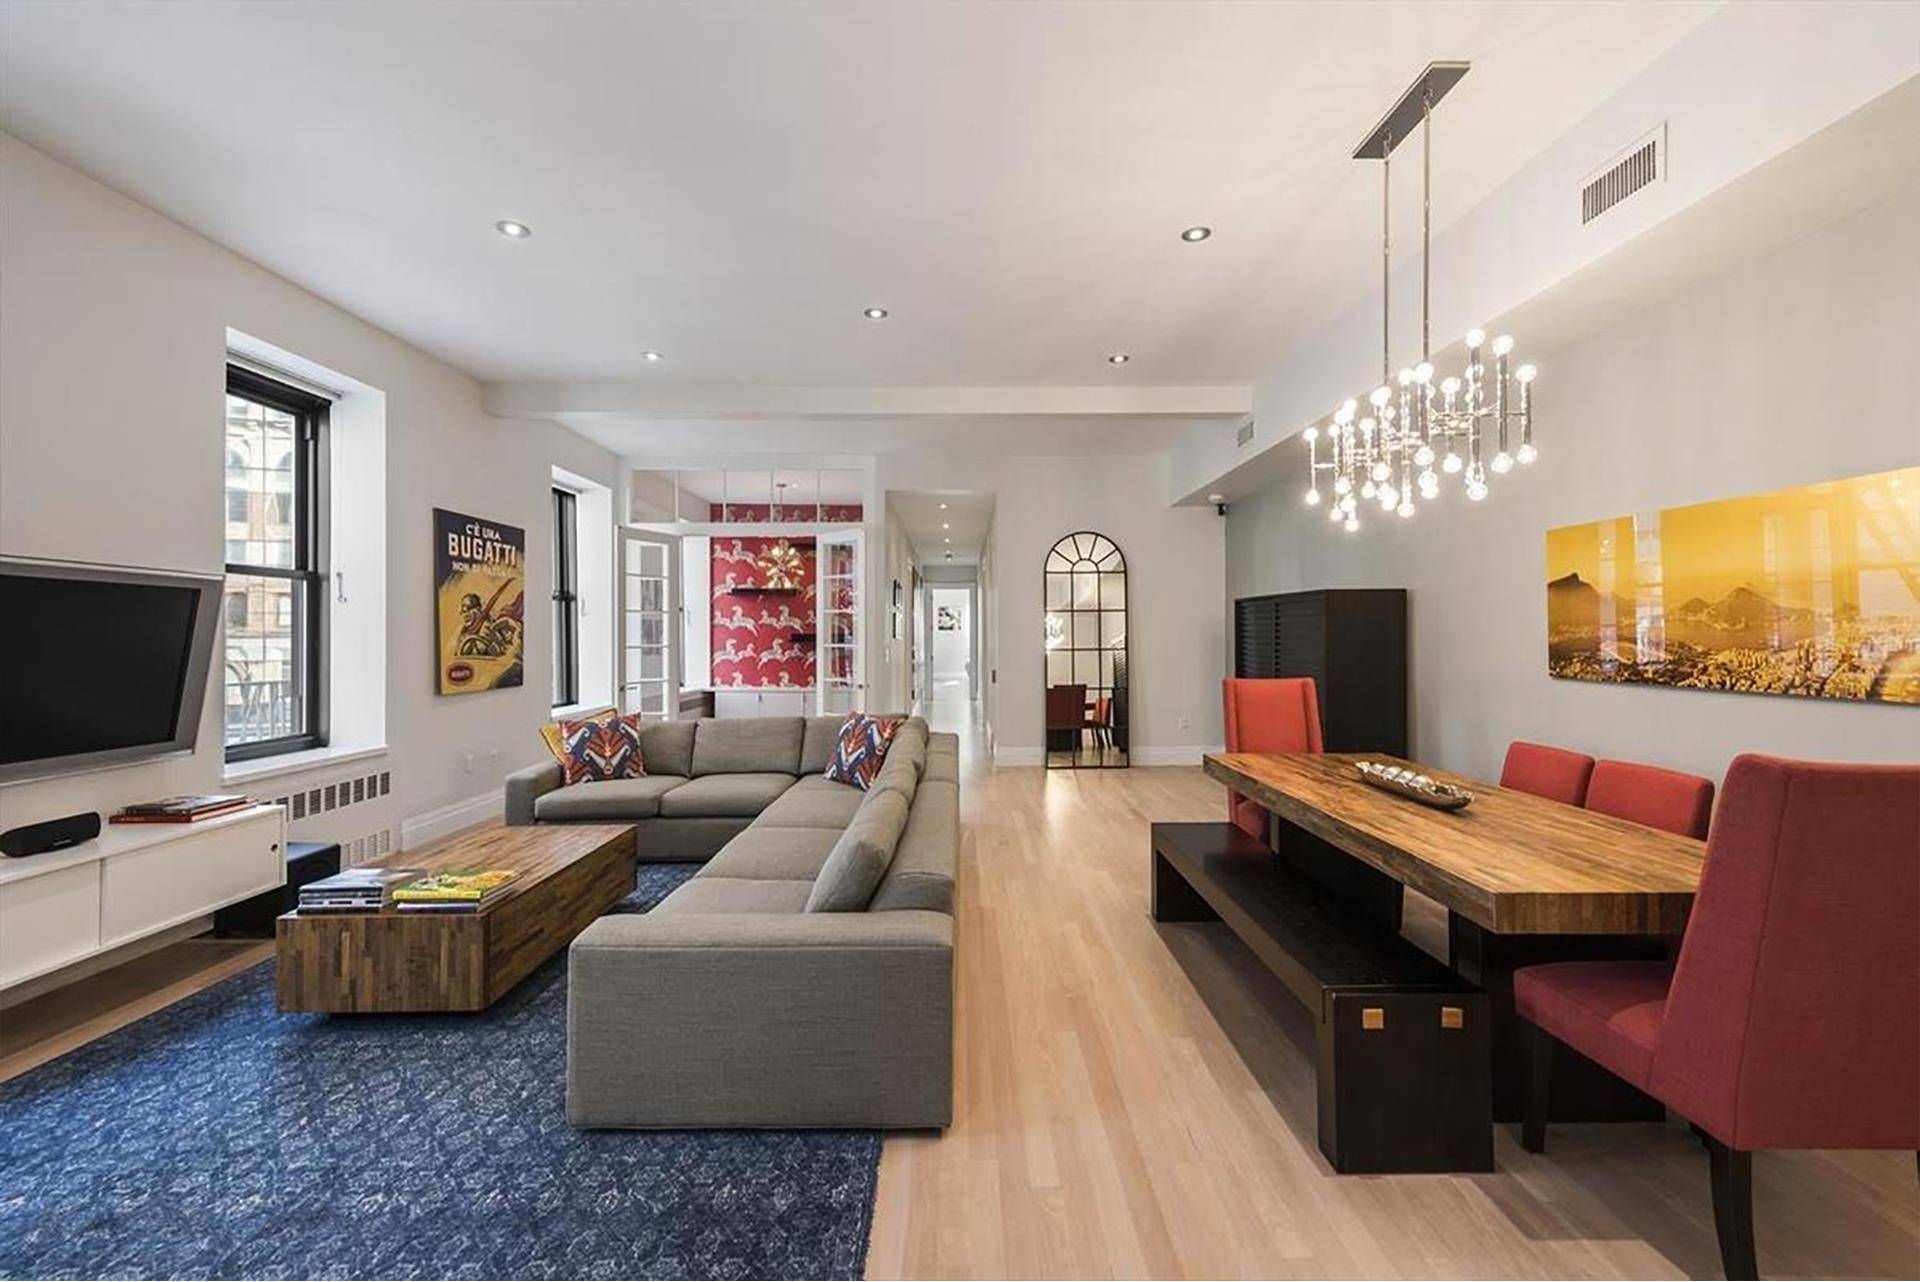 Mint condition four bedroom condominium loft in the heart of Greenwich Village, with three full bathrooms, private laundry and central air conditioning.